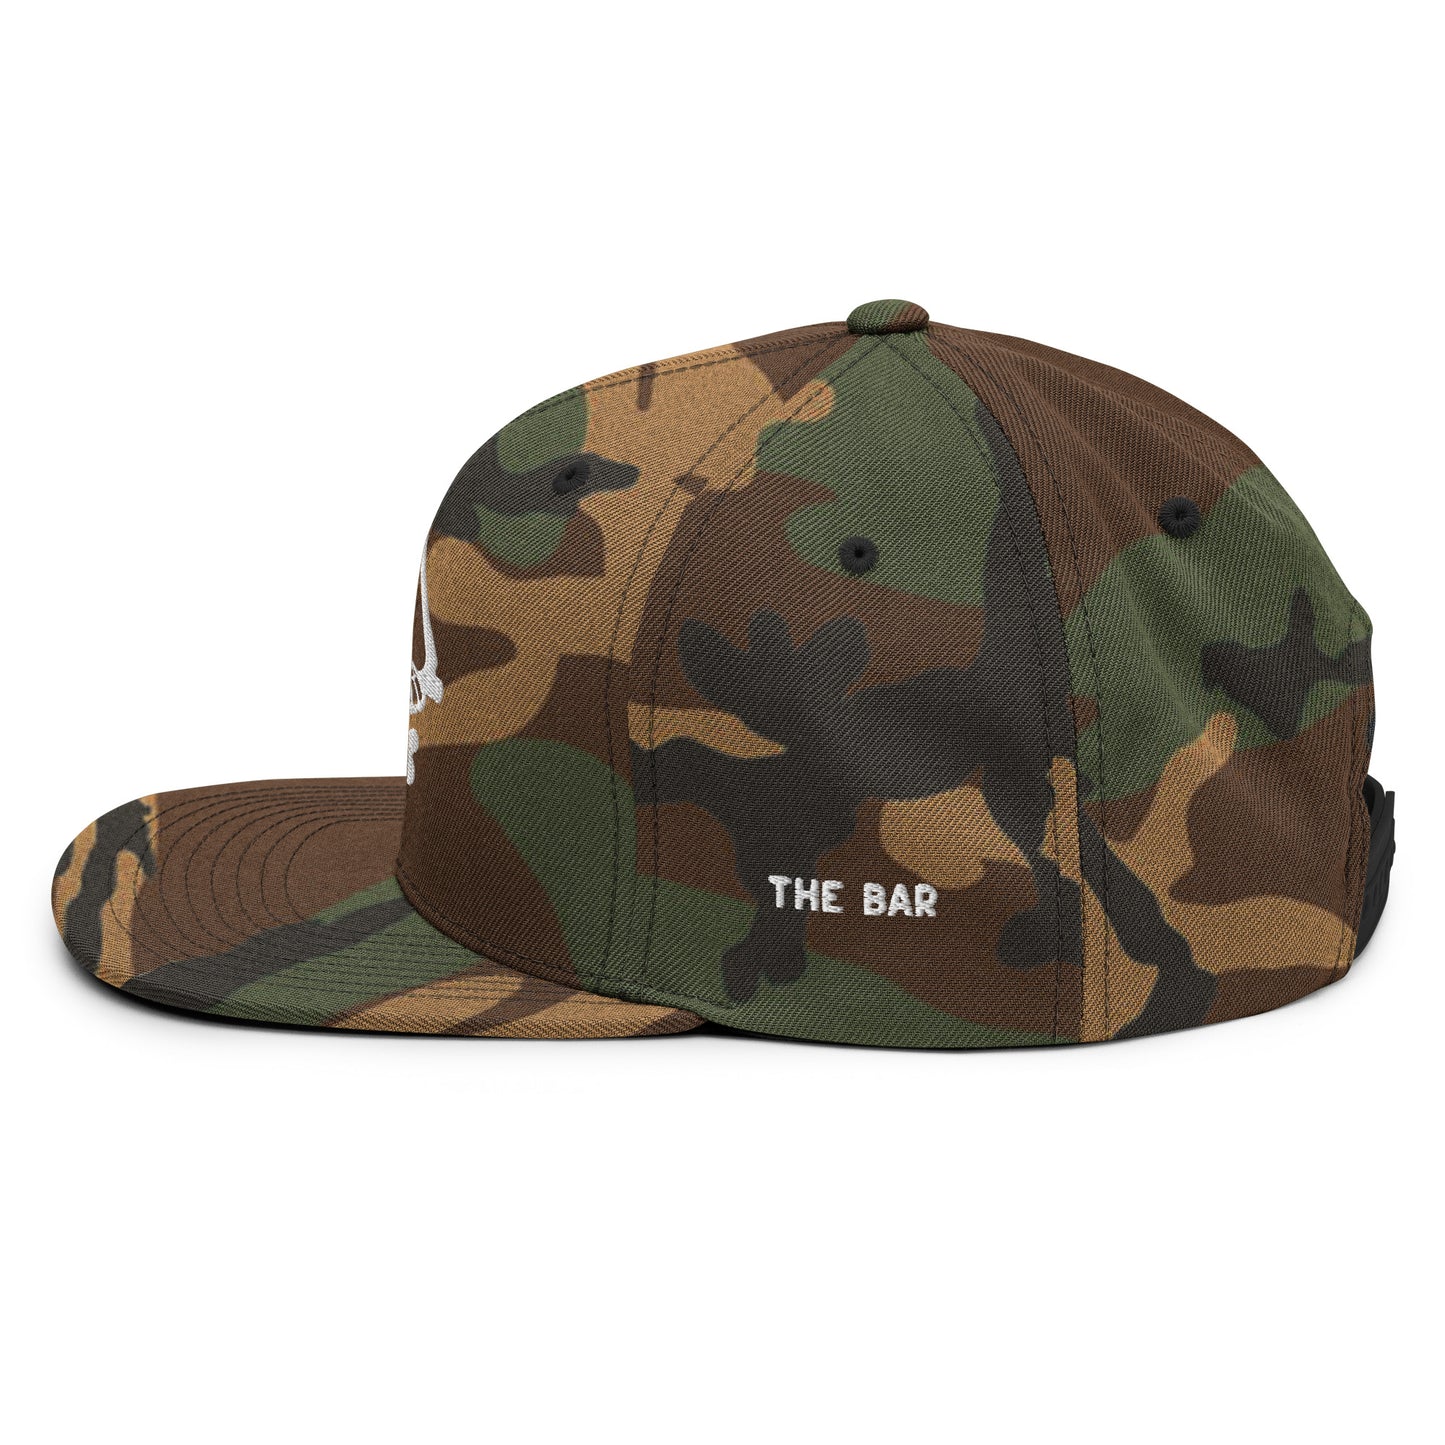 DON'T PULL THE BAR Snapback Hat